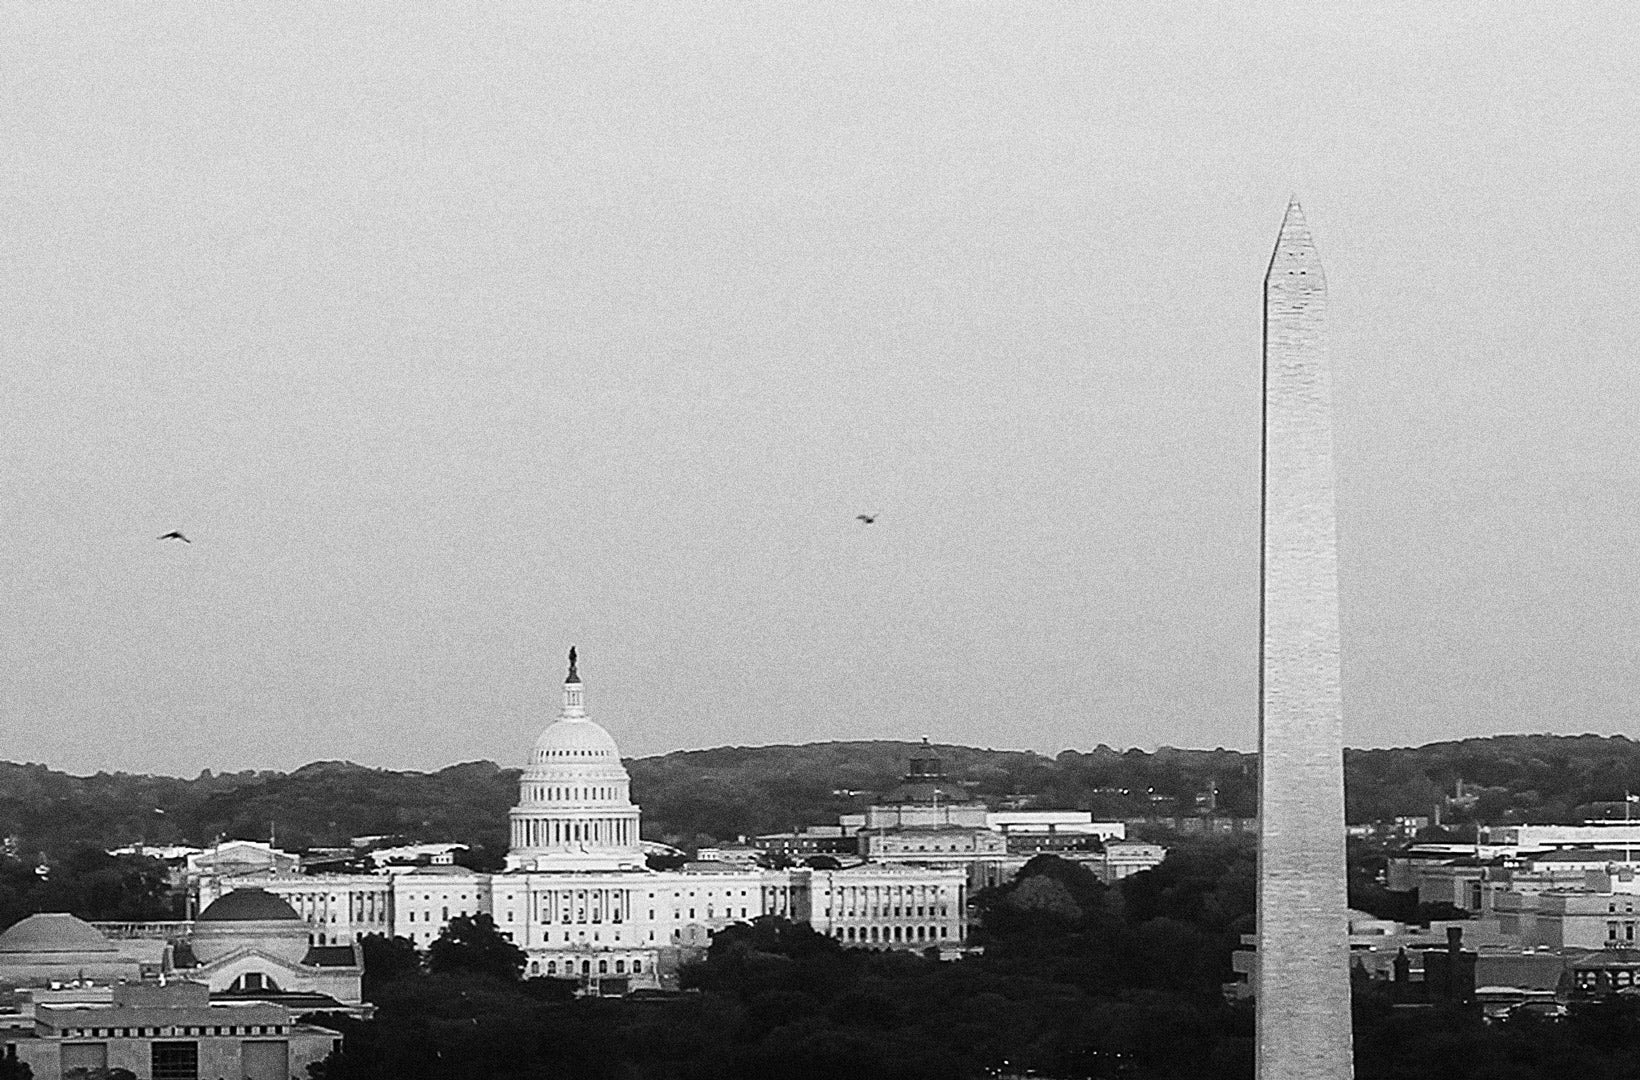 A Washington, D.C. aerial shot showing the Capitol Building & Washington Monument in black and white